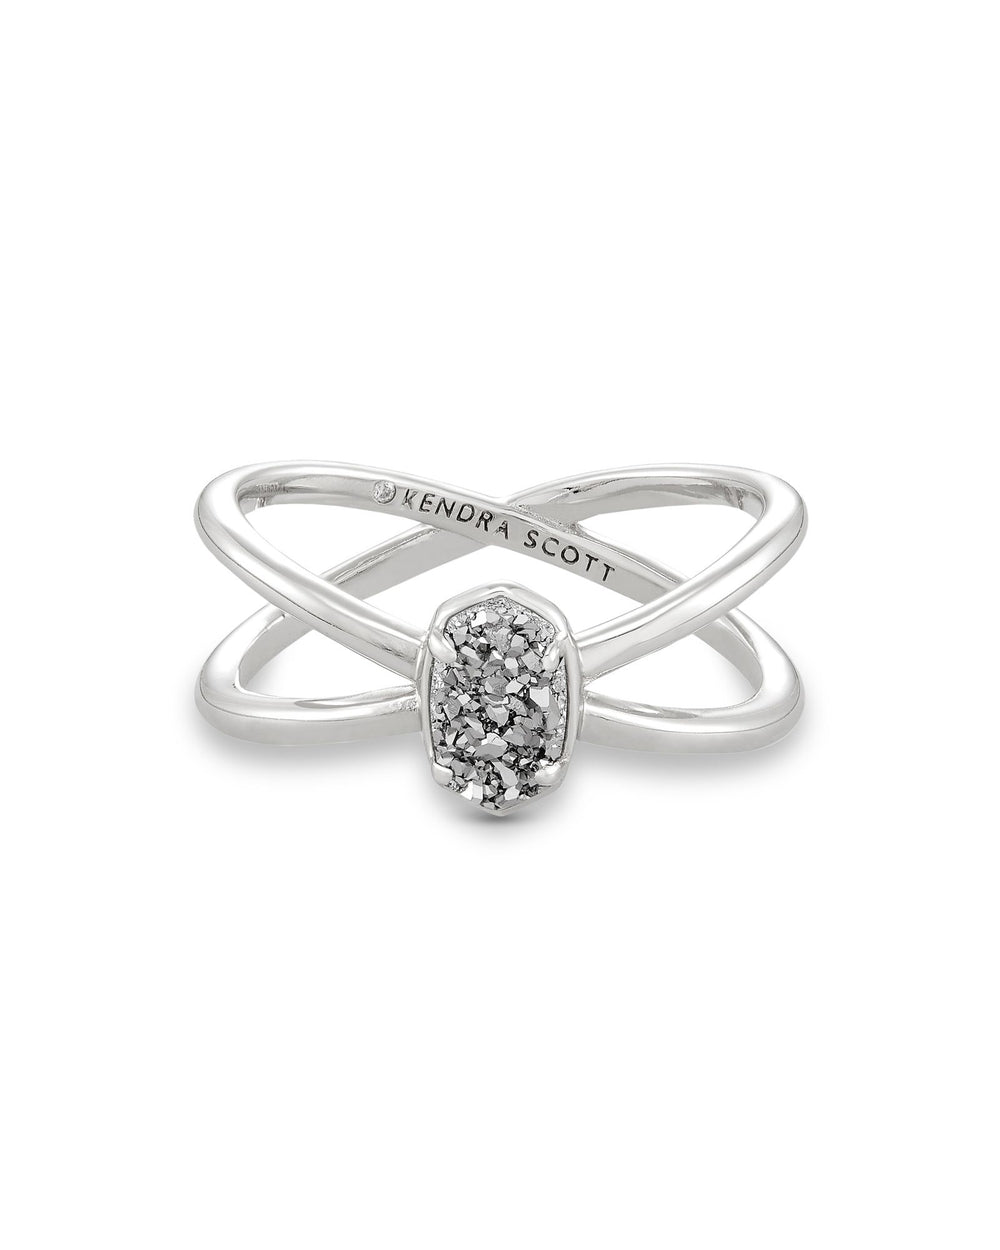 Emilie Double Band Ring - Platinum Drusy